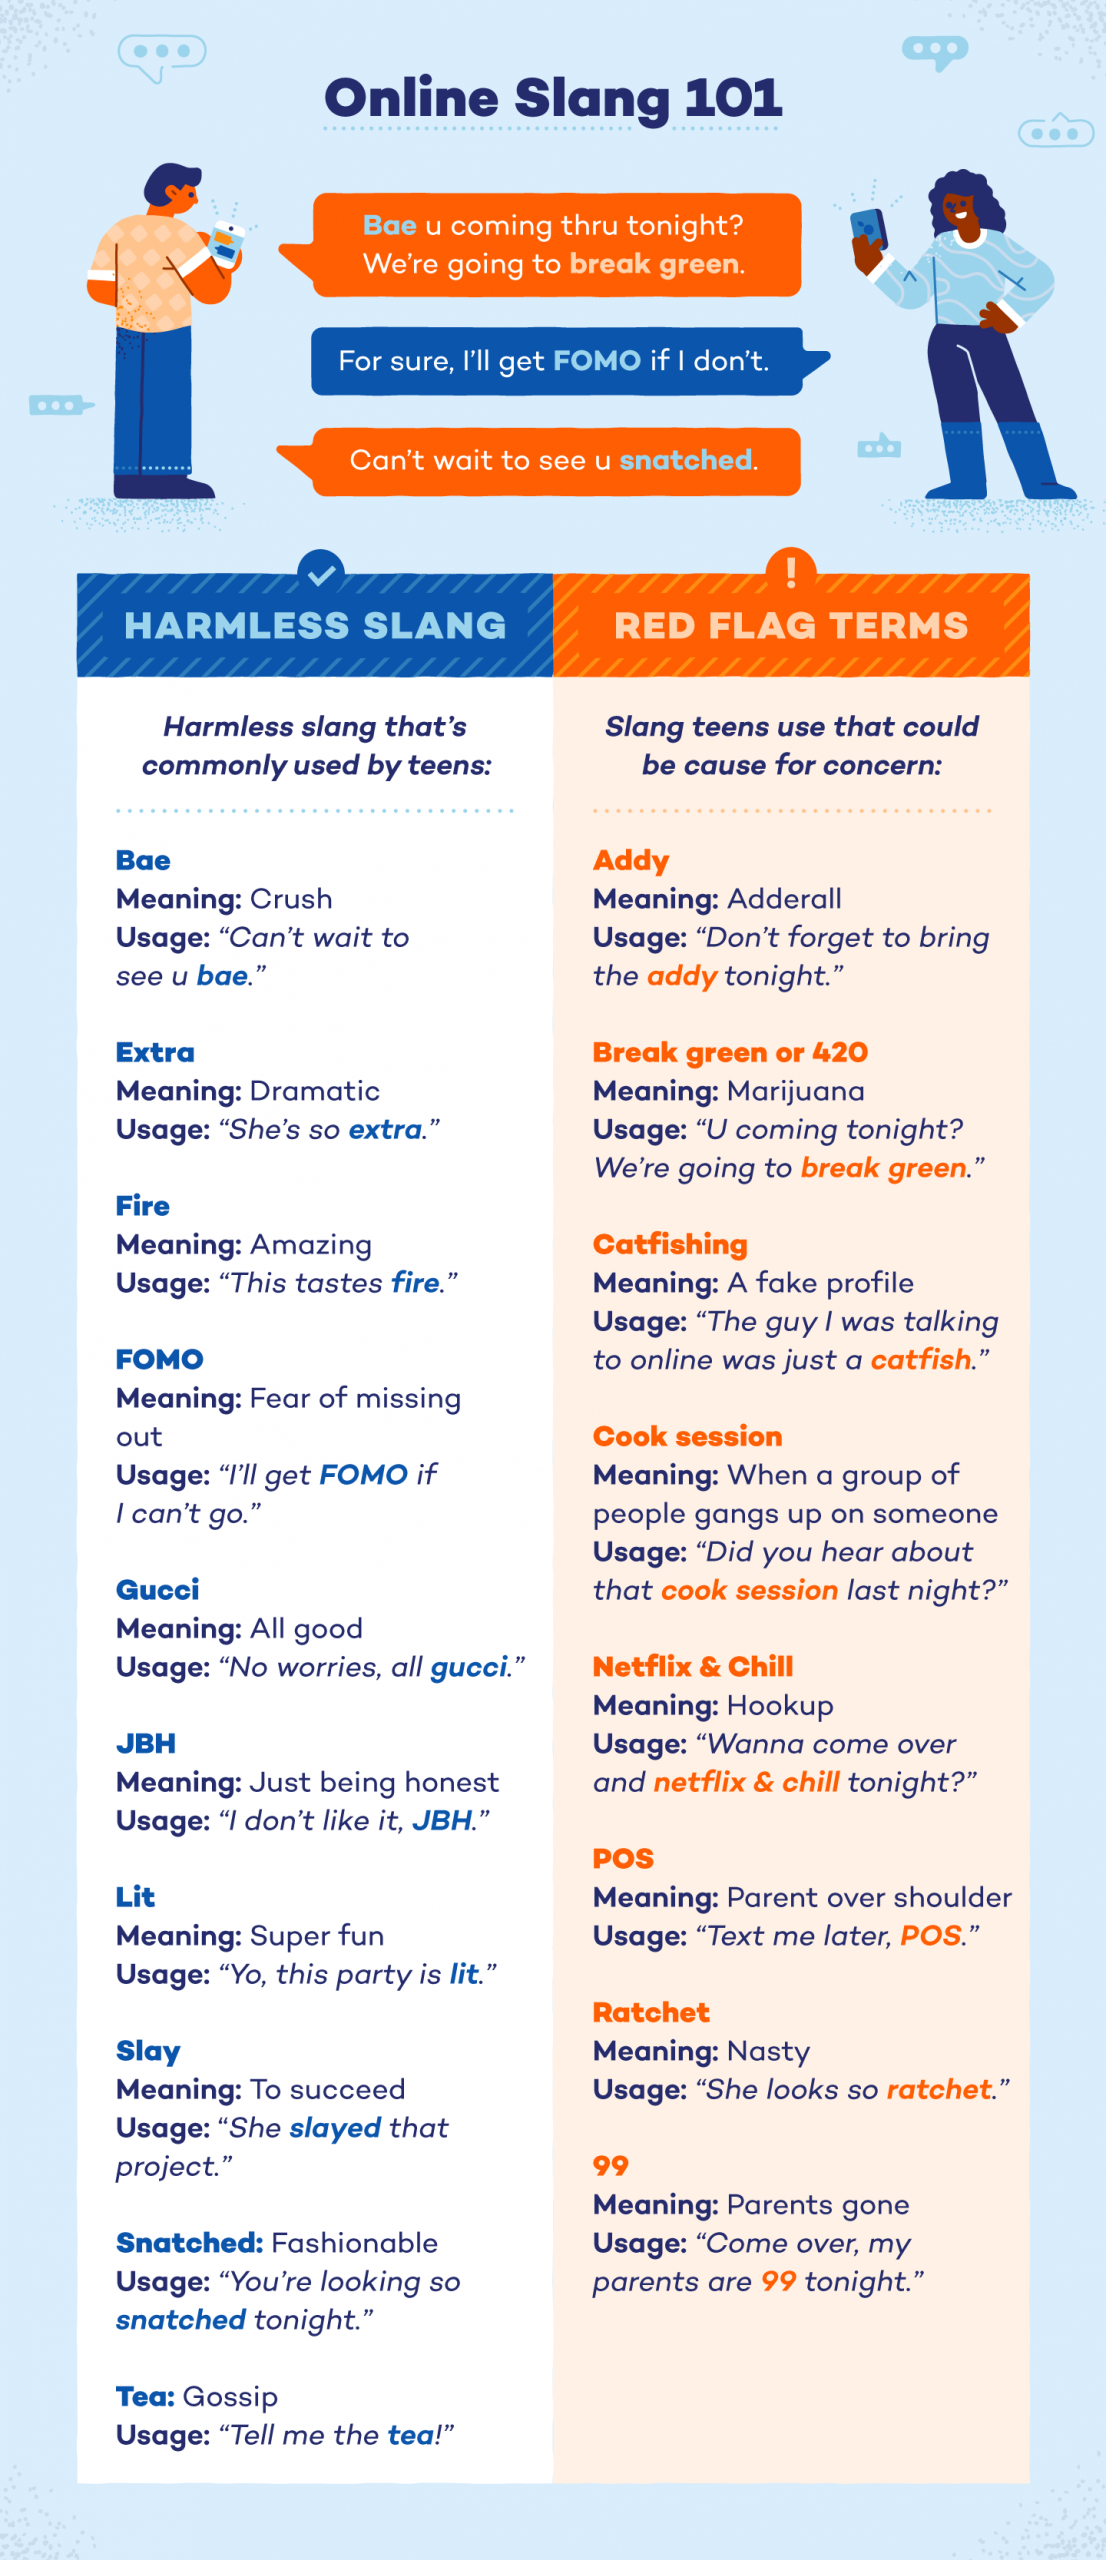 Urban slang words and meanings